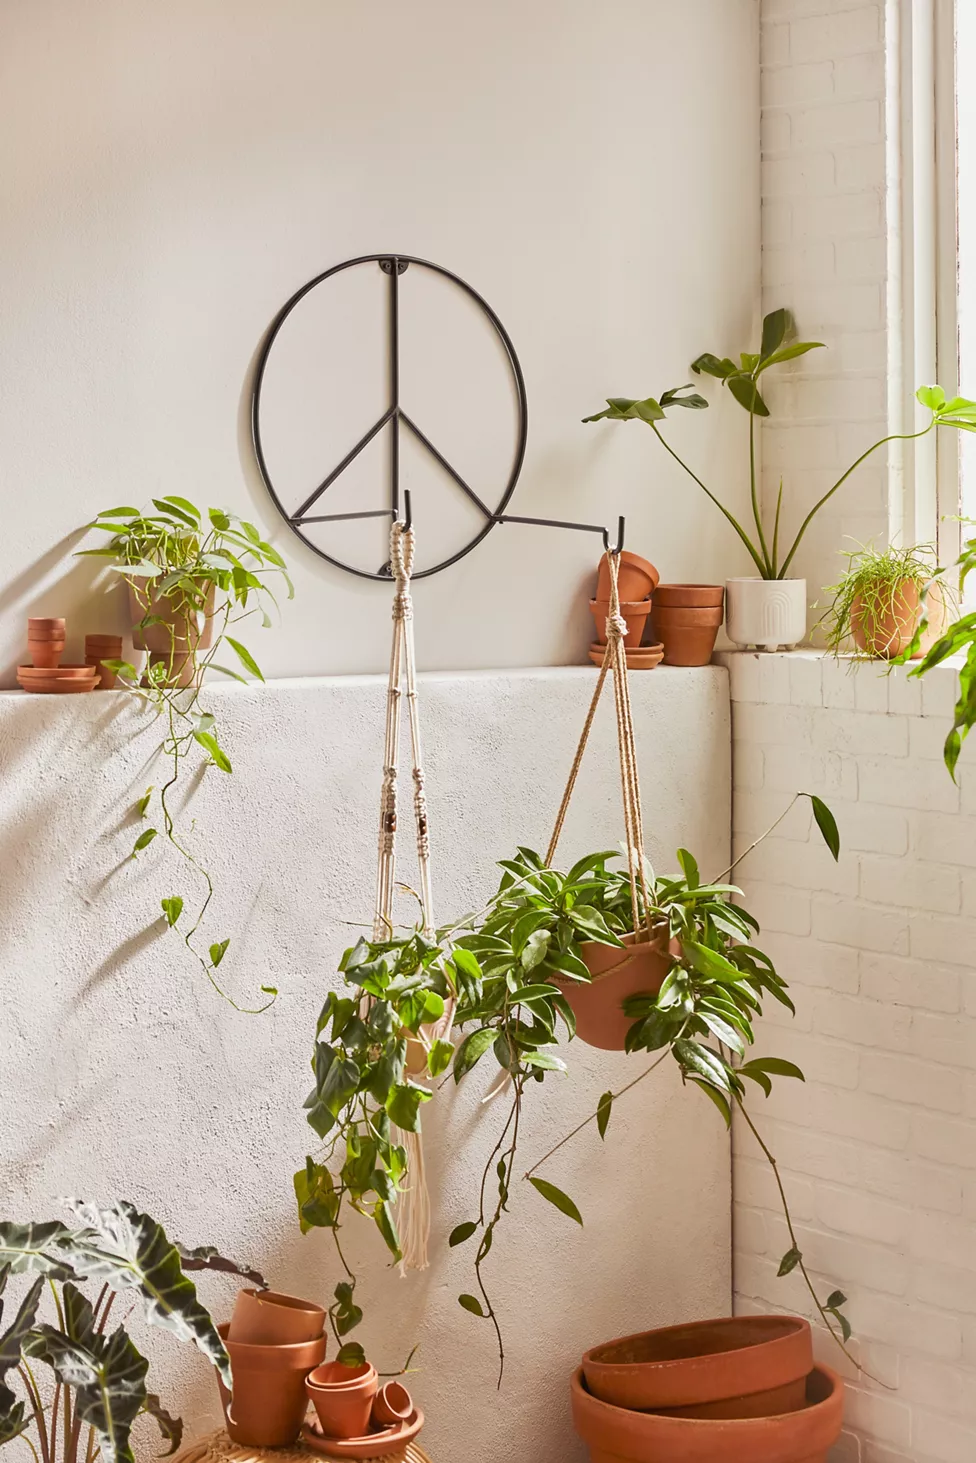 Show Off Your Hanging Baskets with a Plant Hook